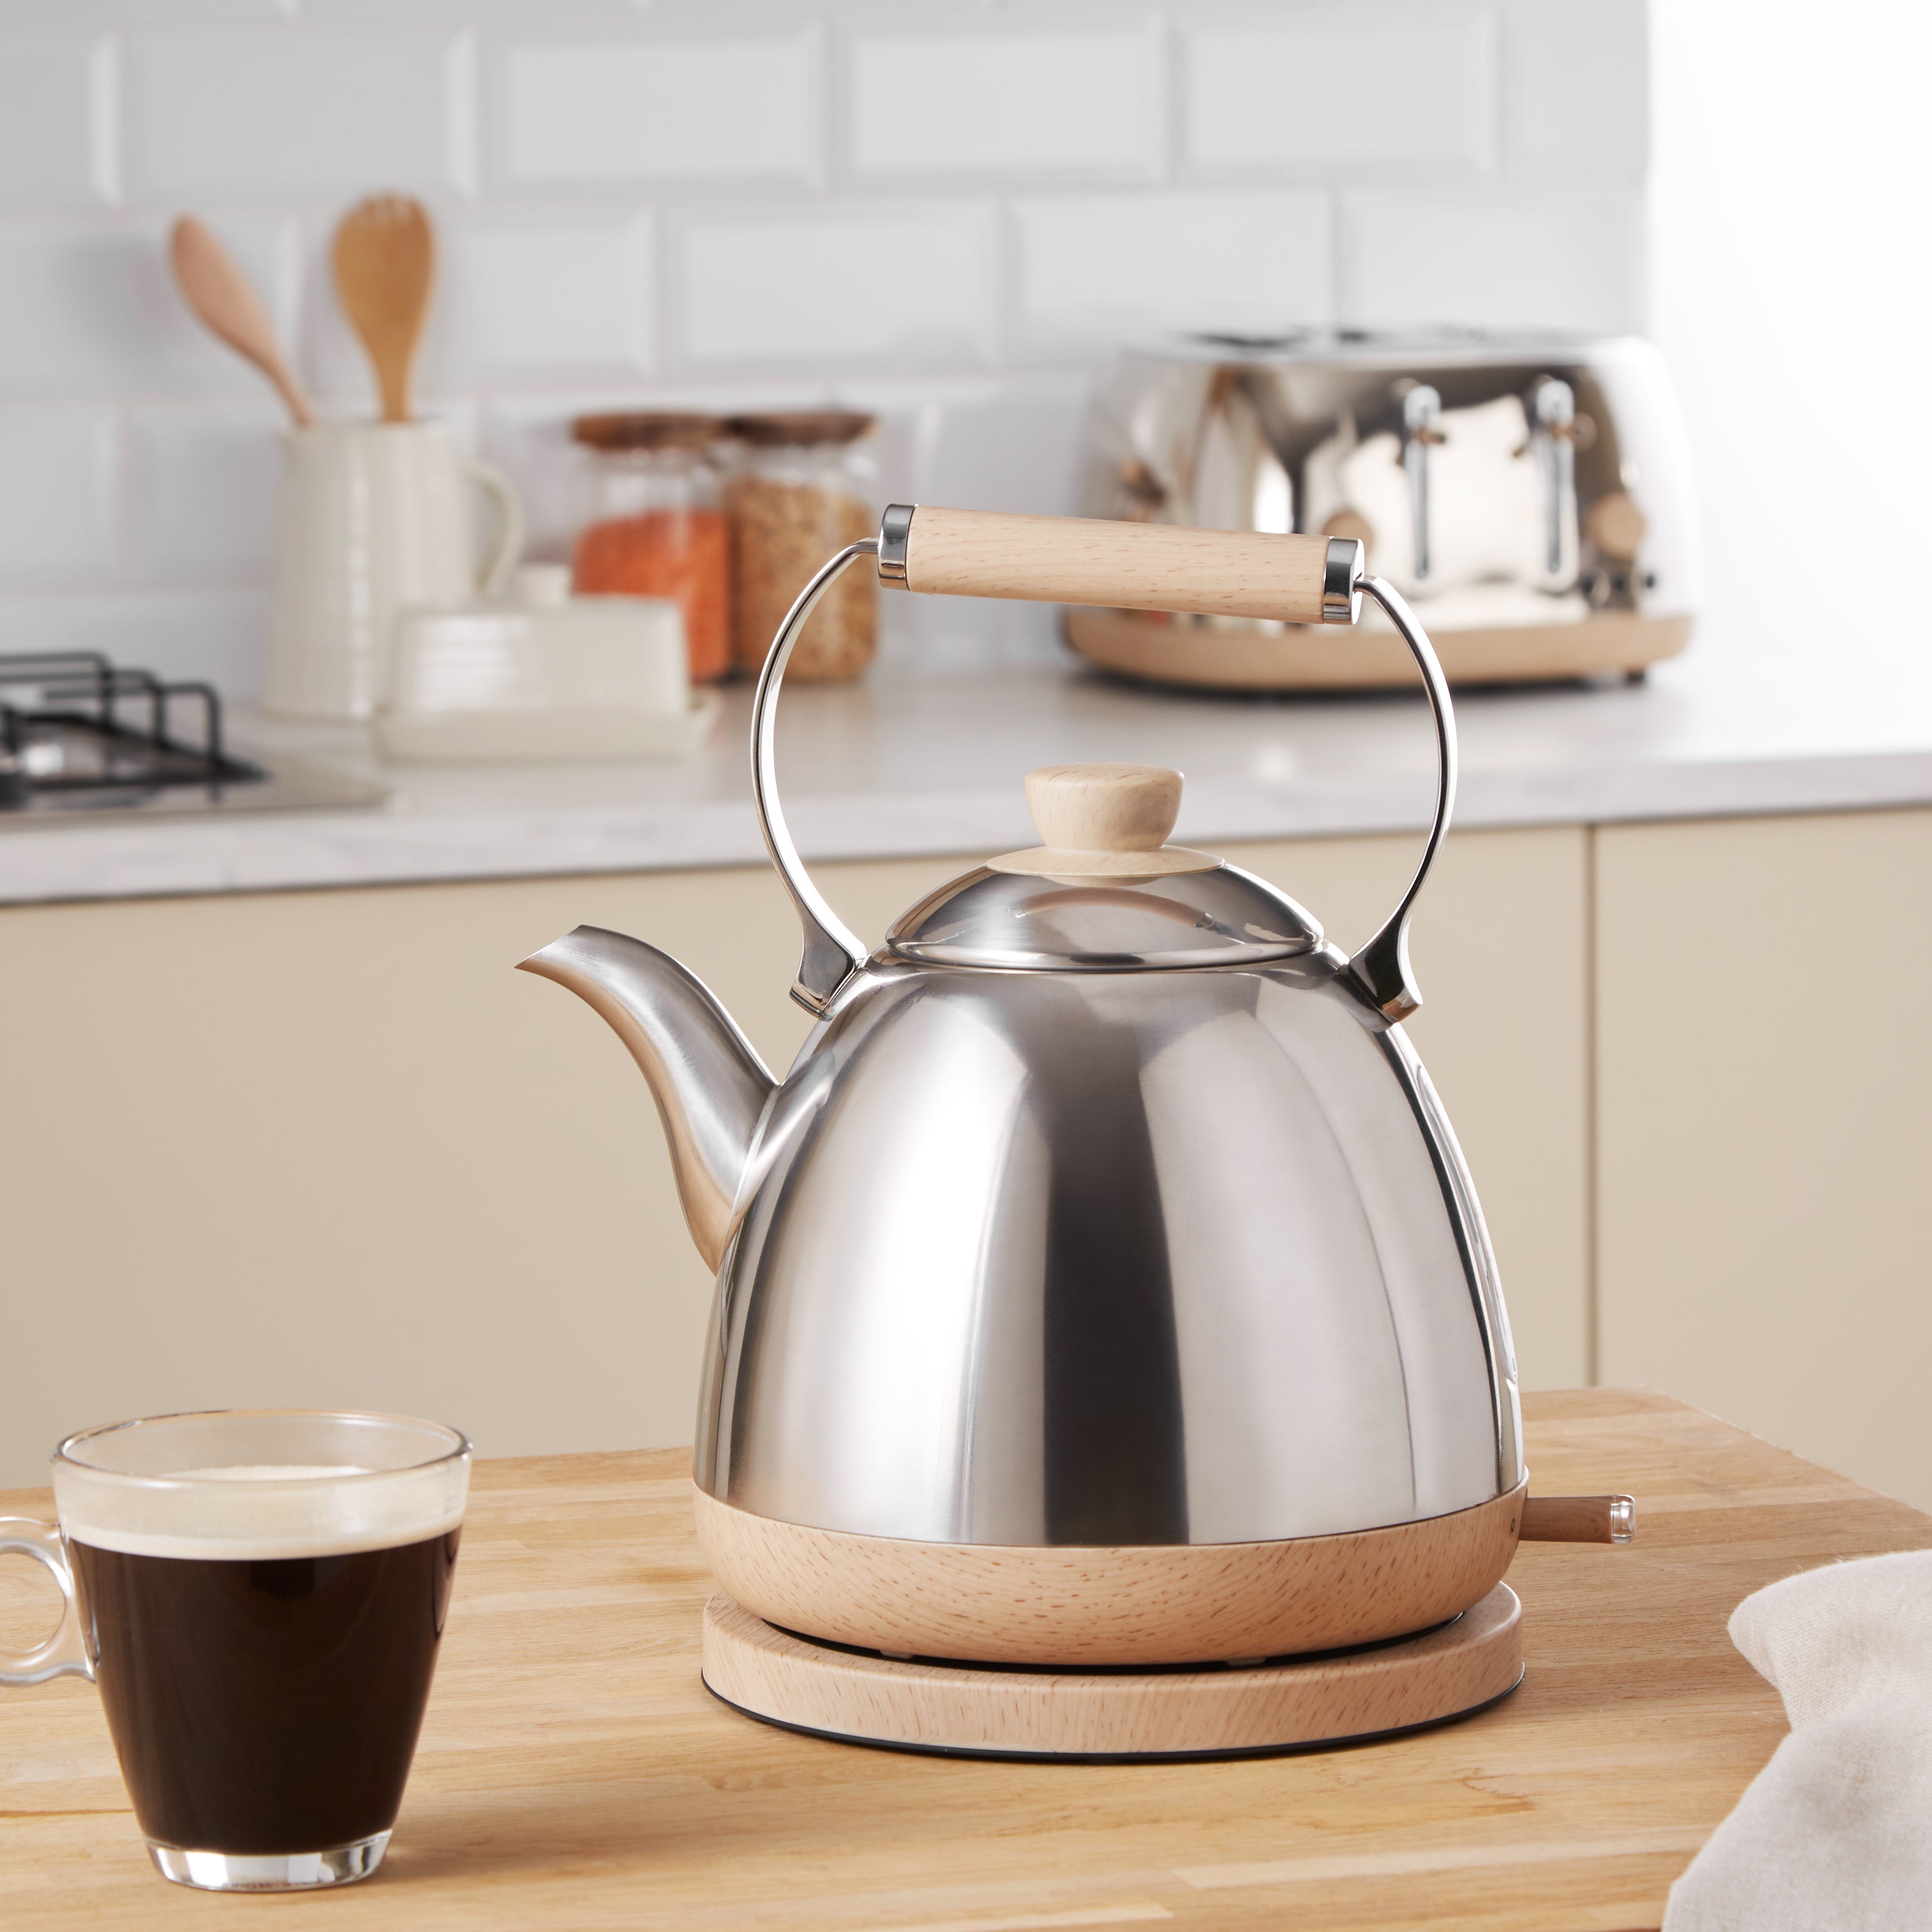 Churchgate Stainless Steel Kettle 1.7L